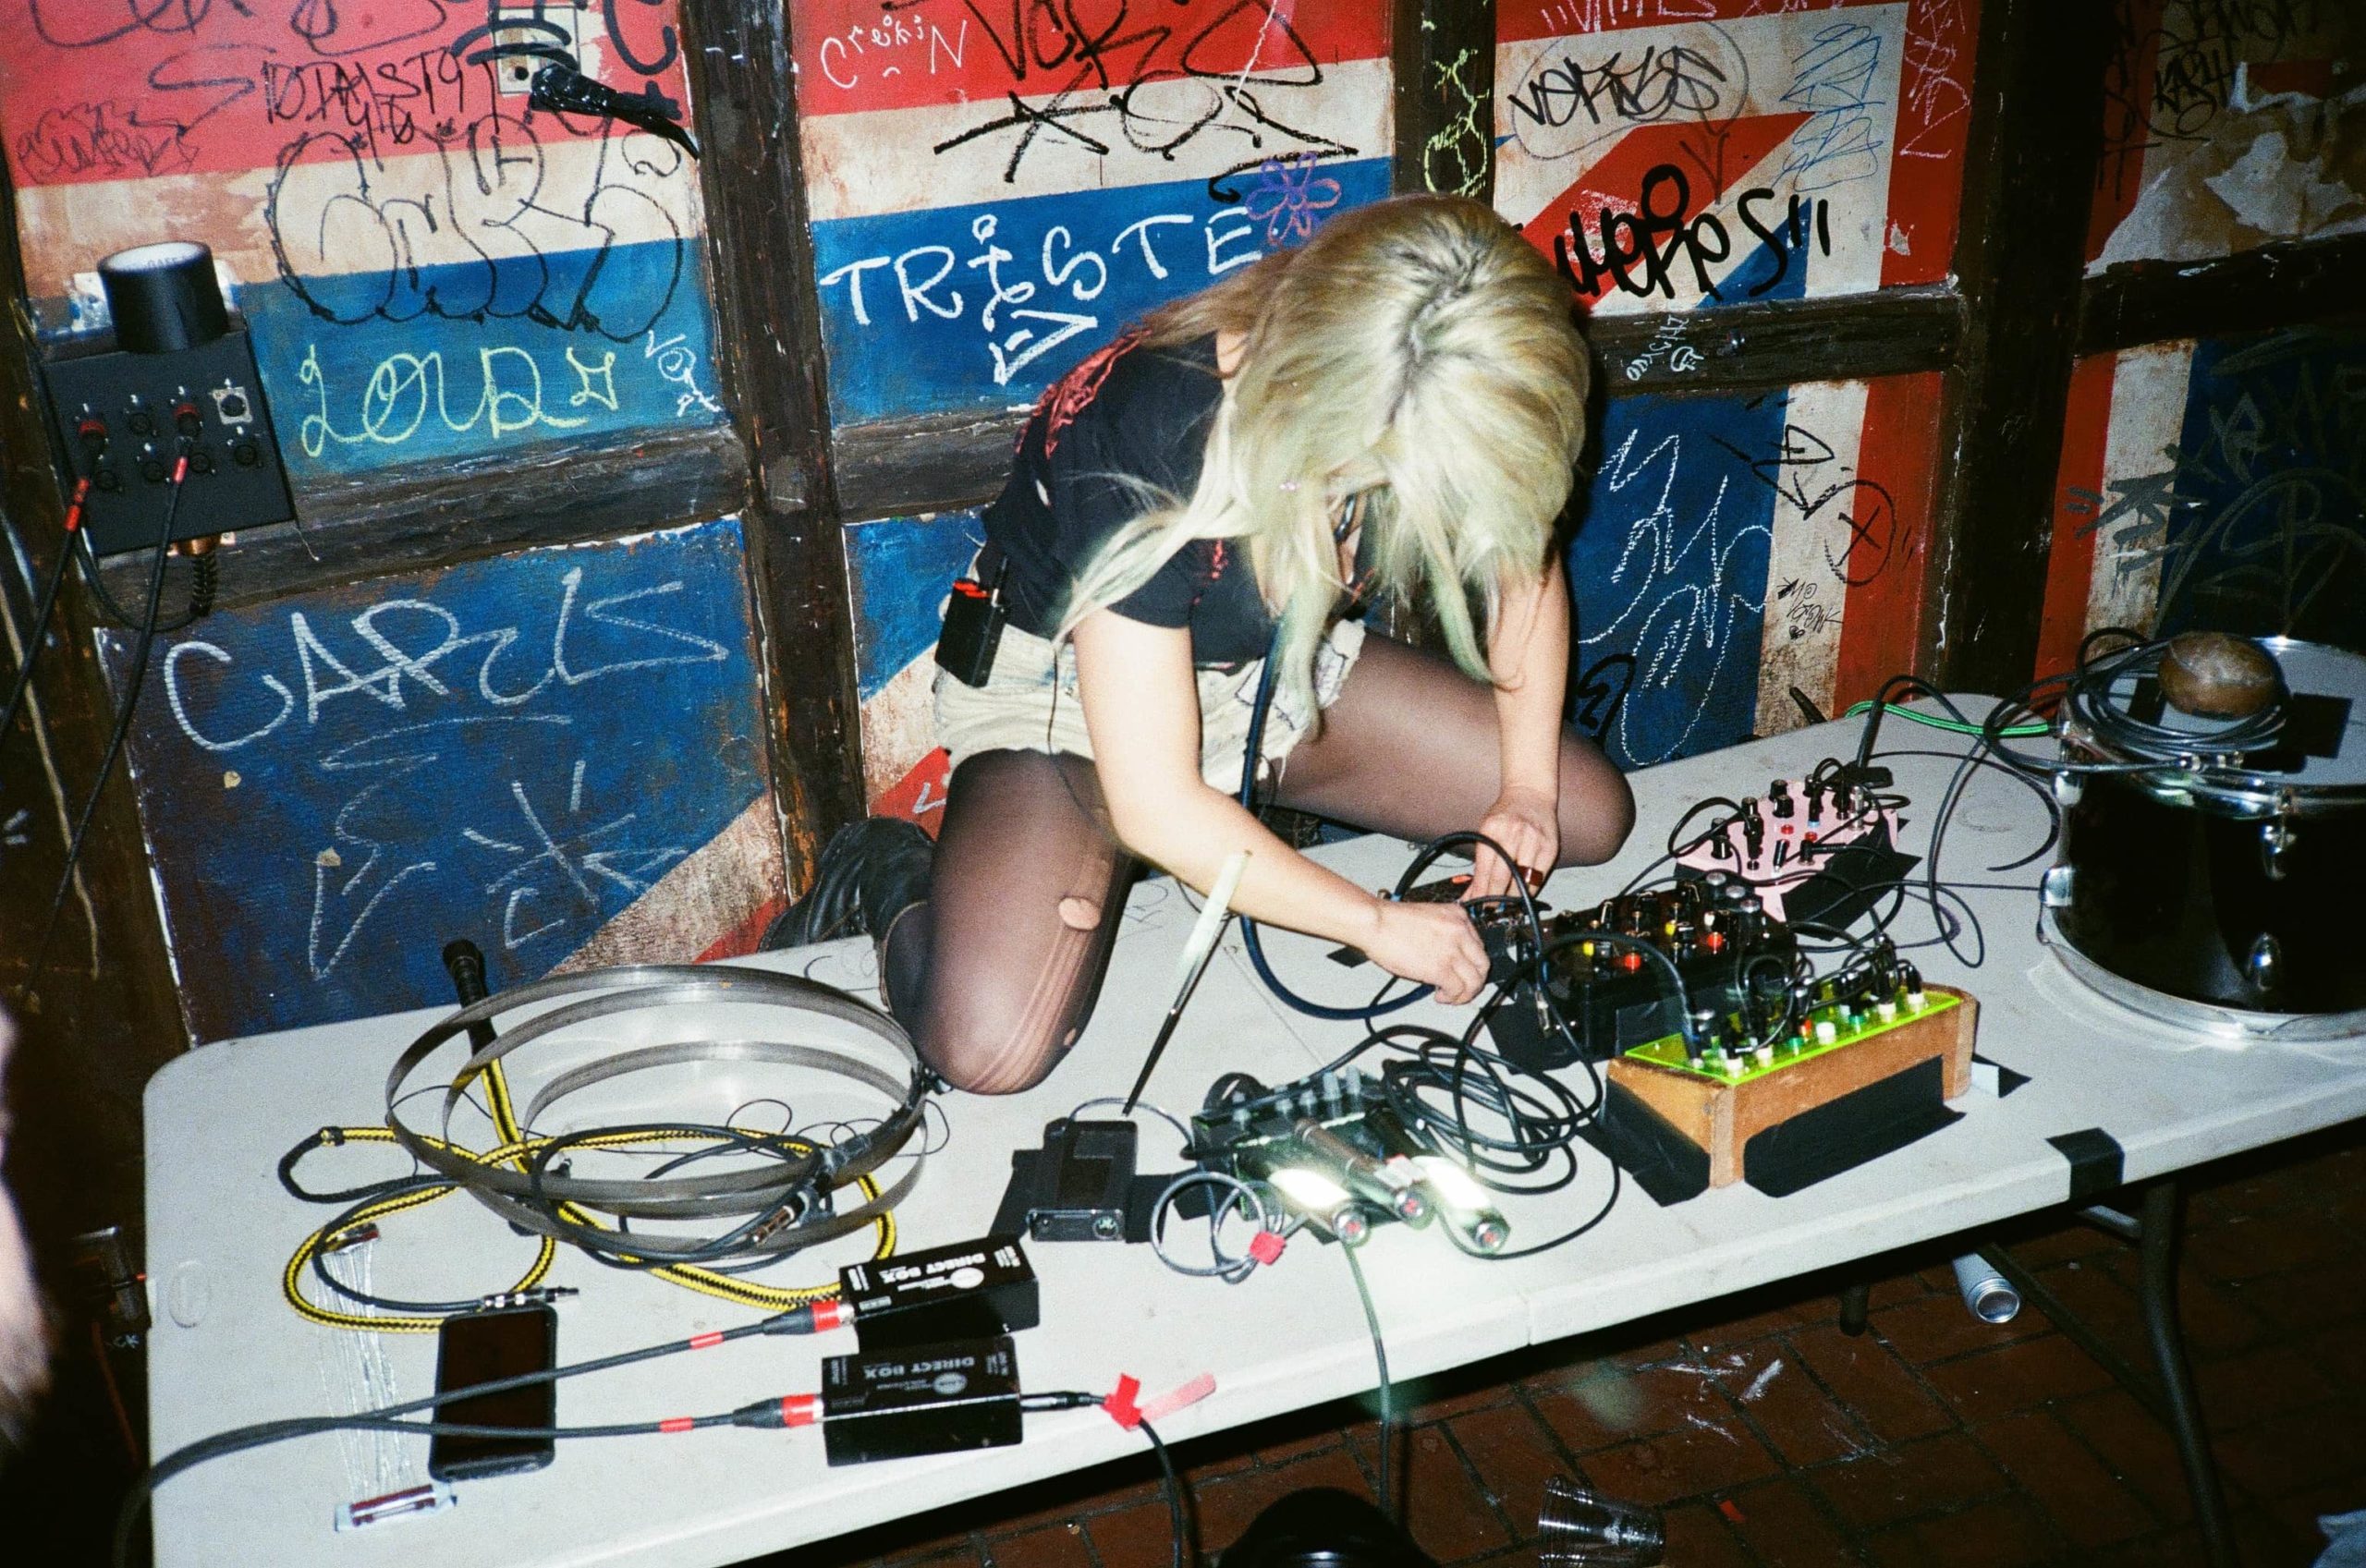 Victoria Shen in mid performance is crawling on a table filled with various electronic music producing gear.